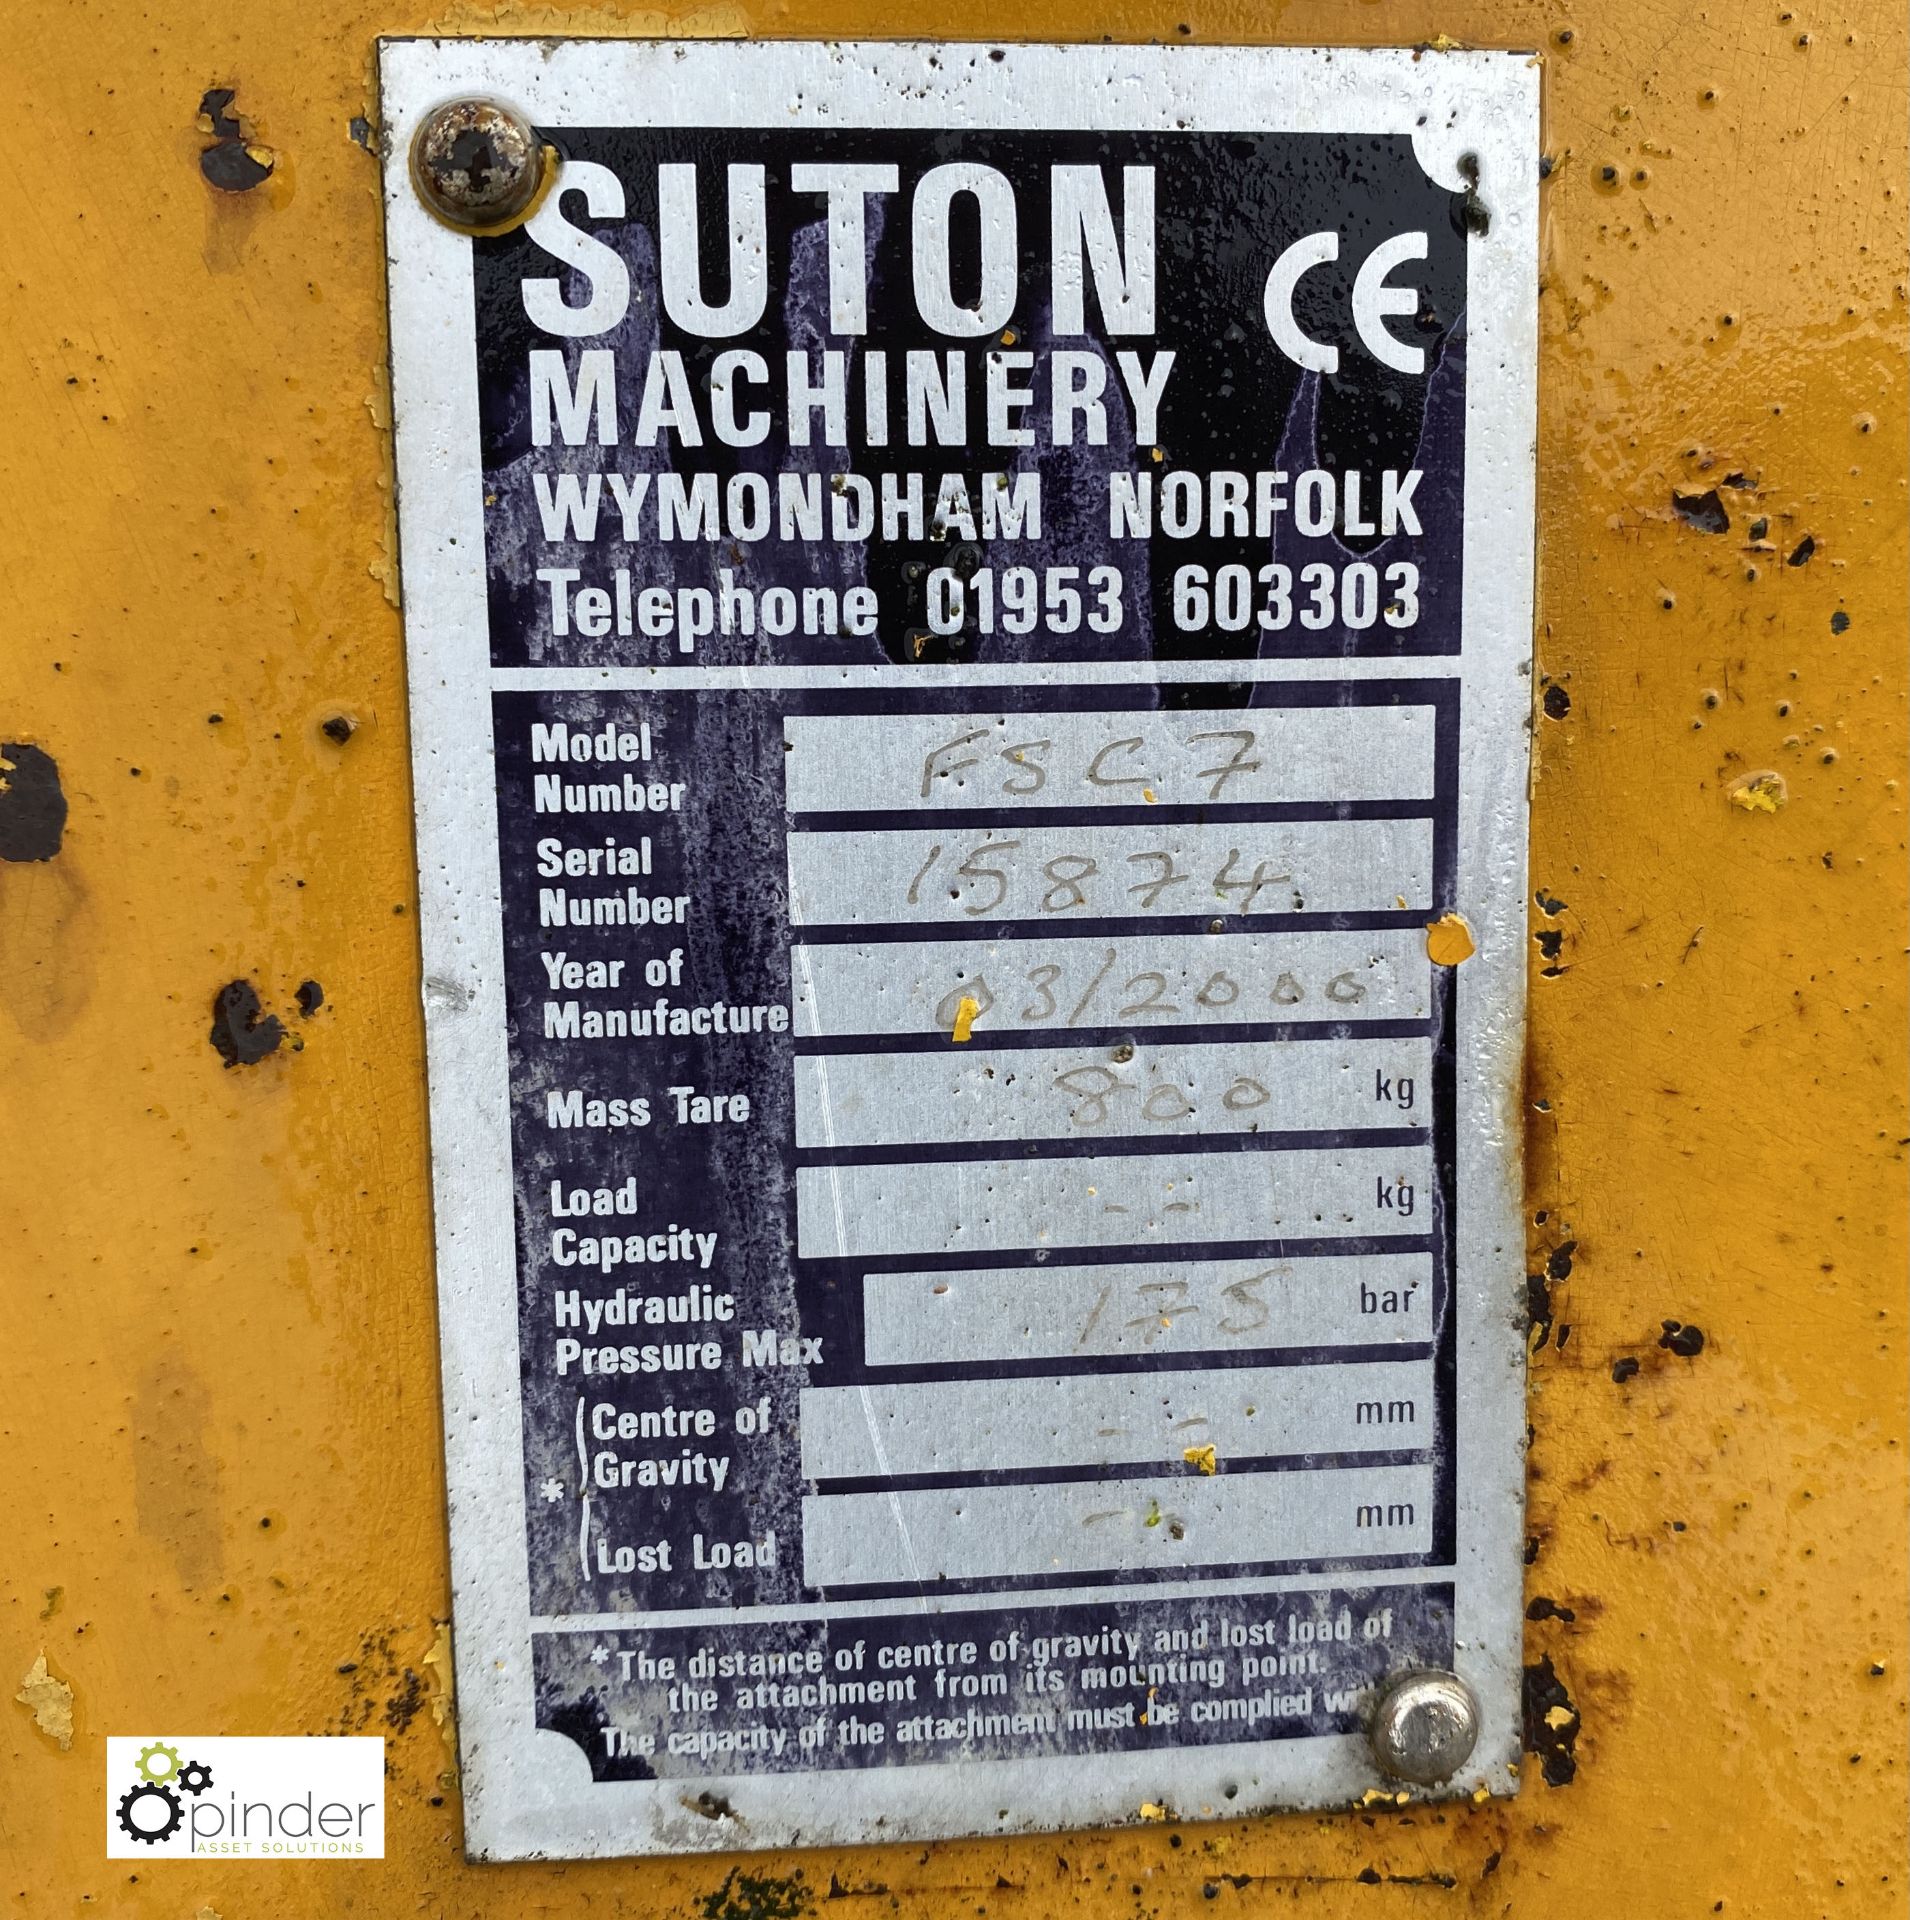 Suton FSC7 Sweeper Attachment, serial number 15874, year 2000 (location: Croxton) - Image 4 of 8